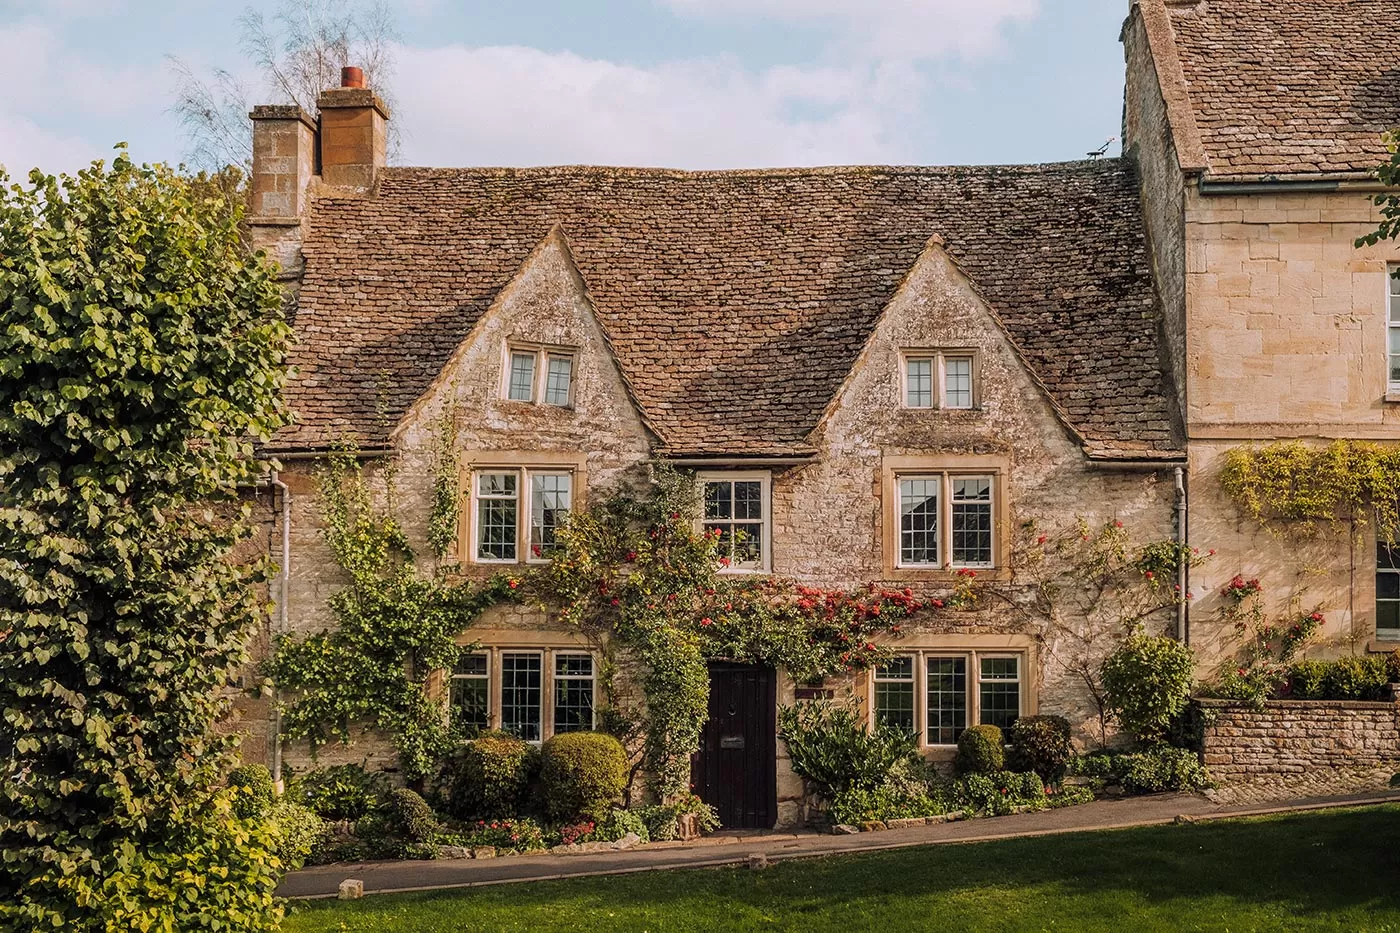 Best Things to Do in Burford - The Cotswolds - Pretty cottage covered in wisteria